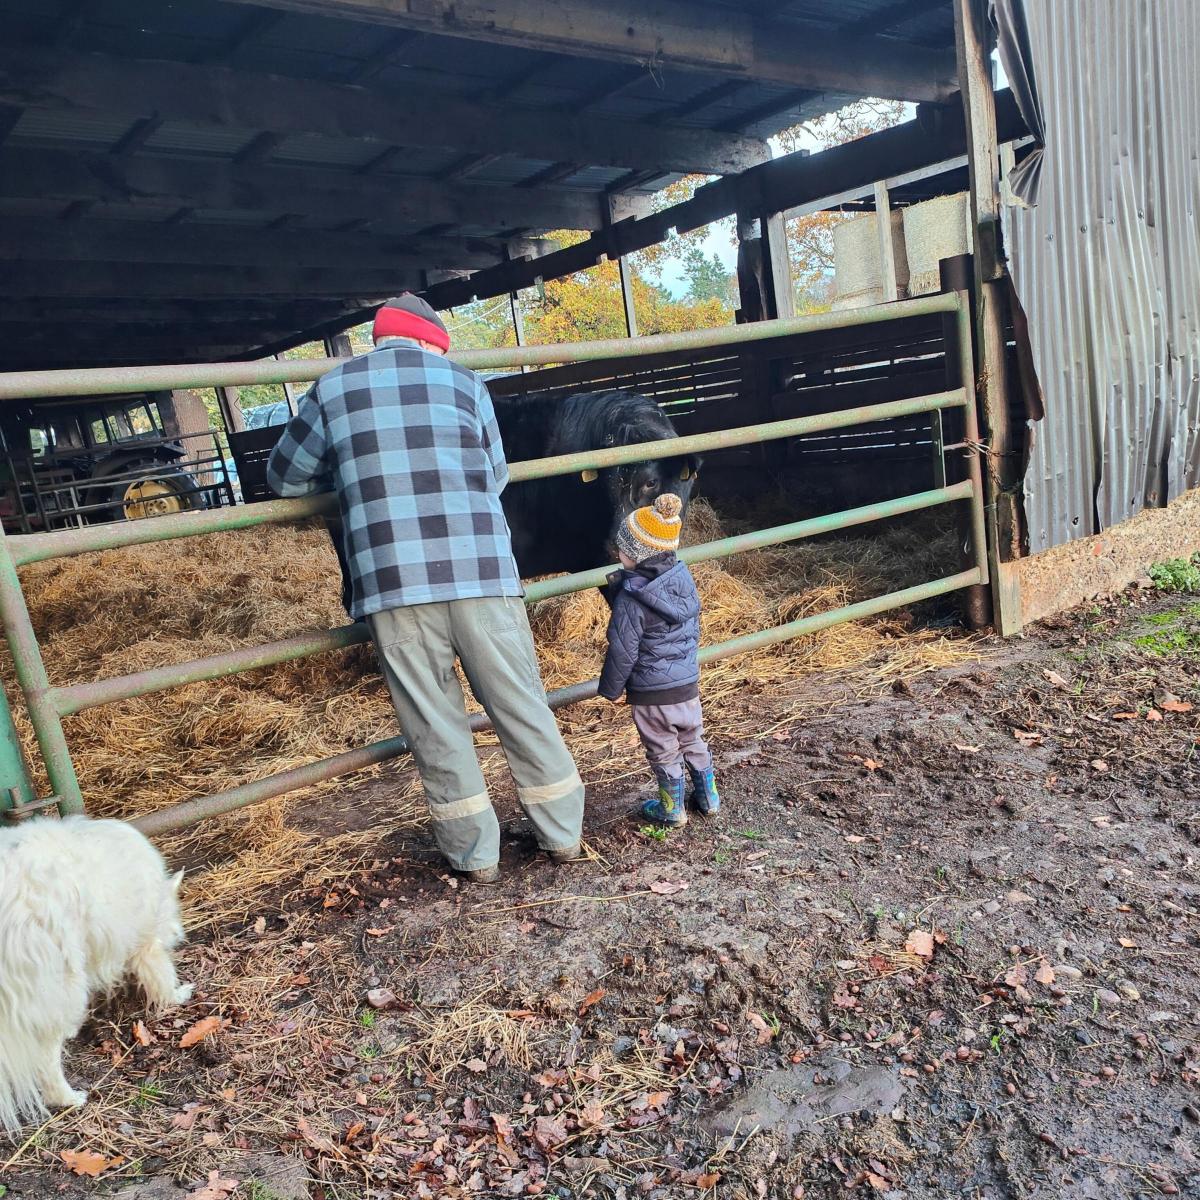 Ewan Findlay - Our son Lyall checking the cows with his grandad